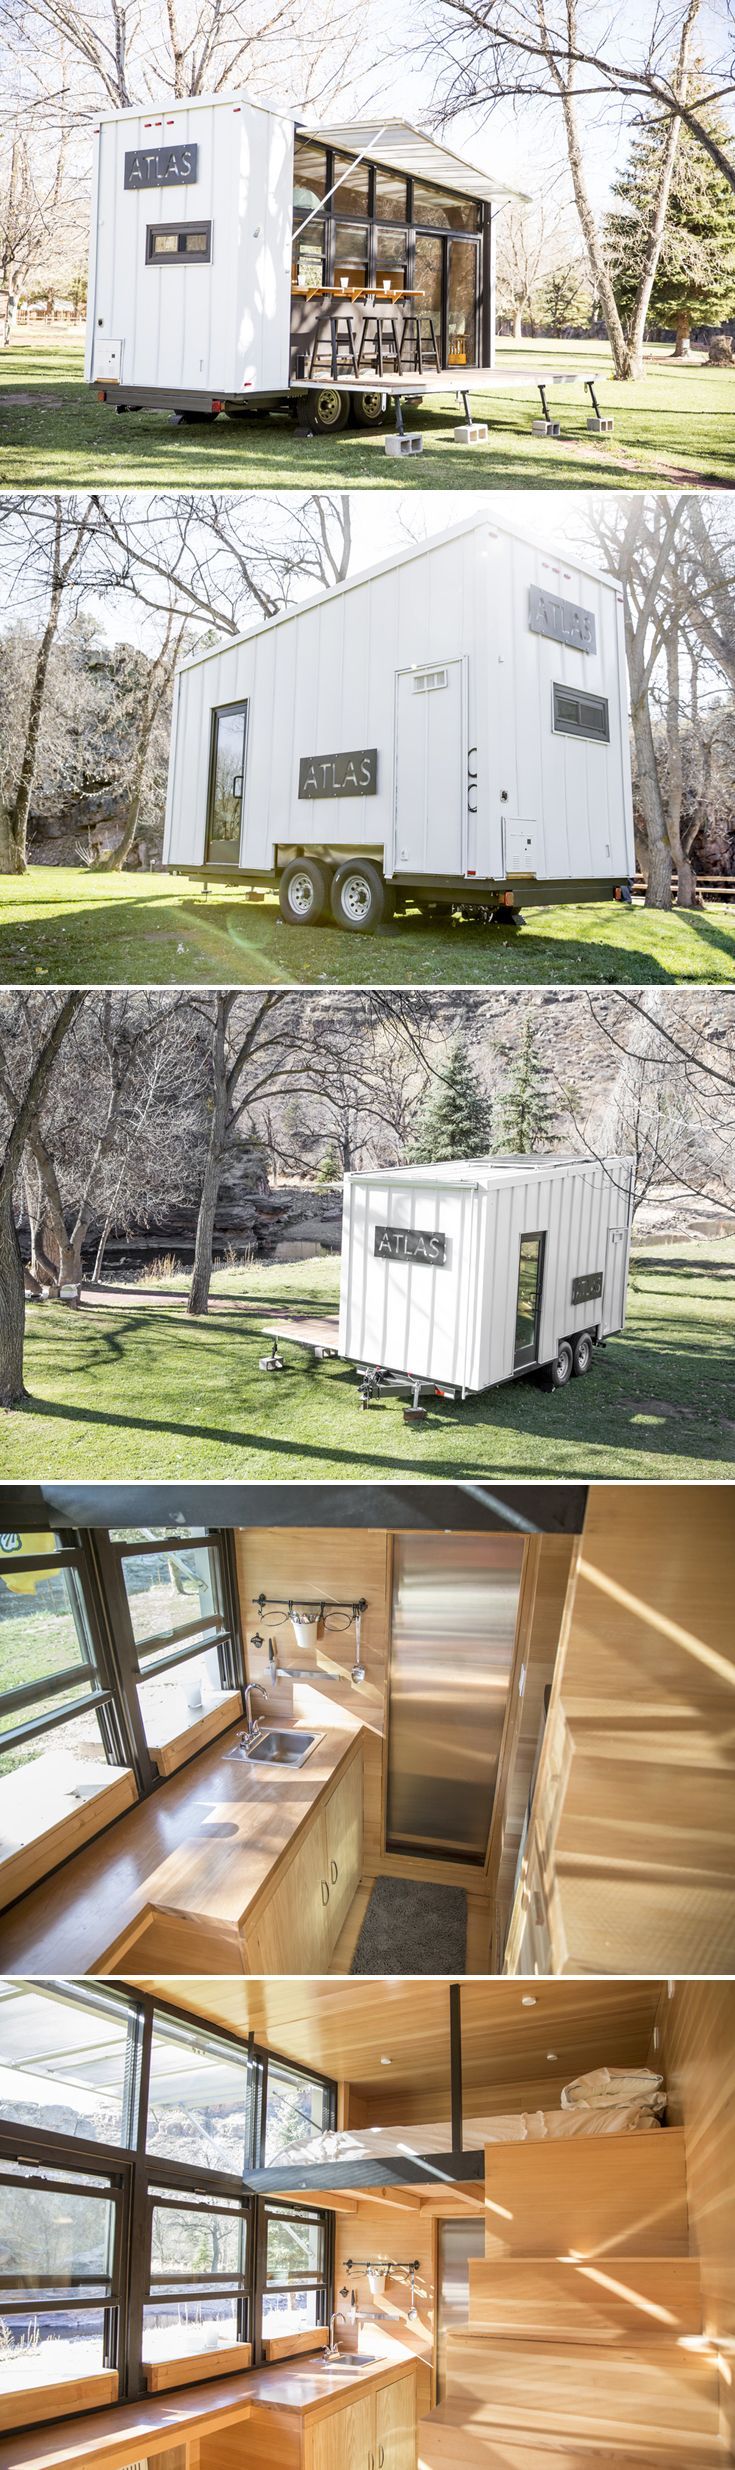 With its full window wall and huge fold down deck, the Atlas Tiny House helps people connect with nature. Available for rent at